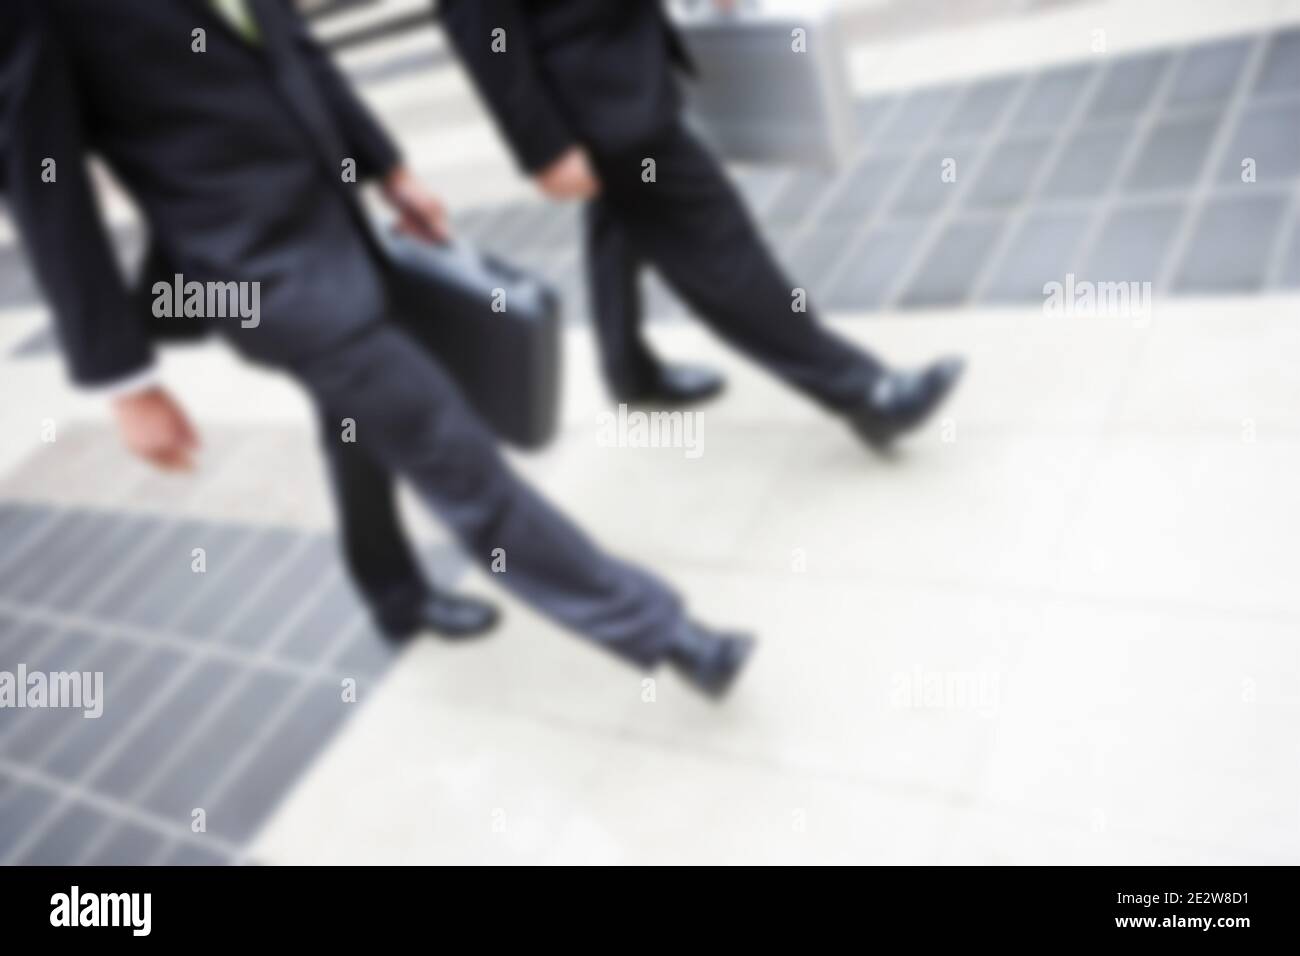 Blurred shot of business people walking together Stock Photo